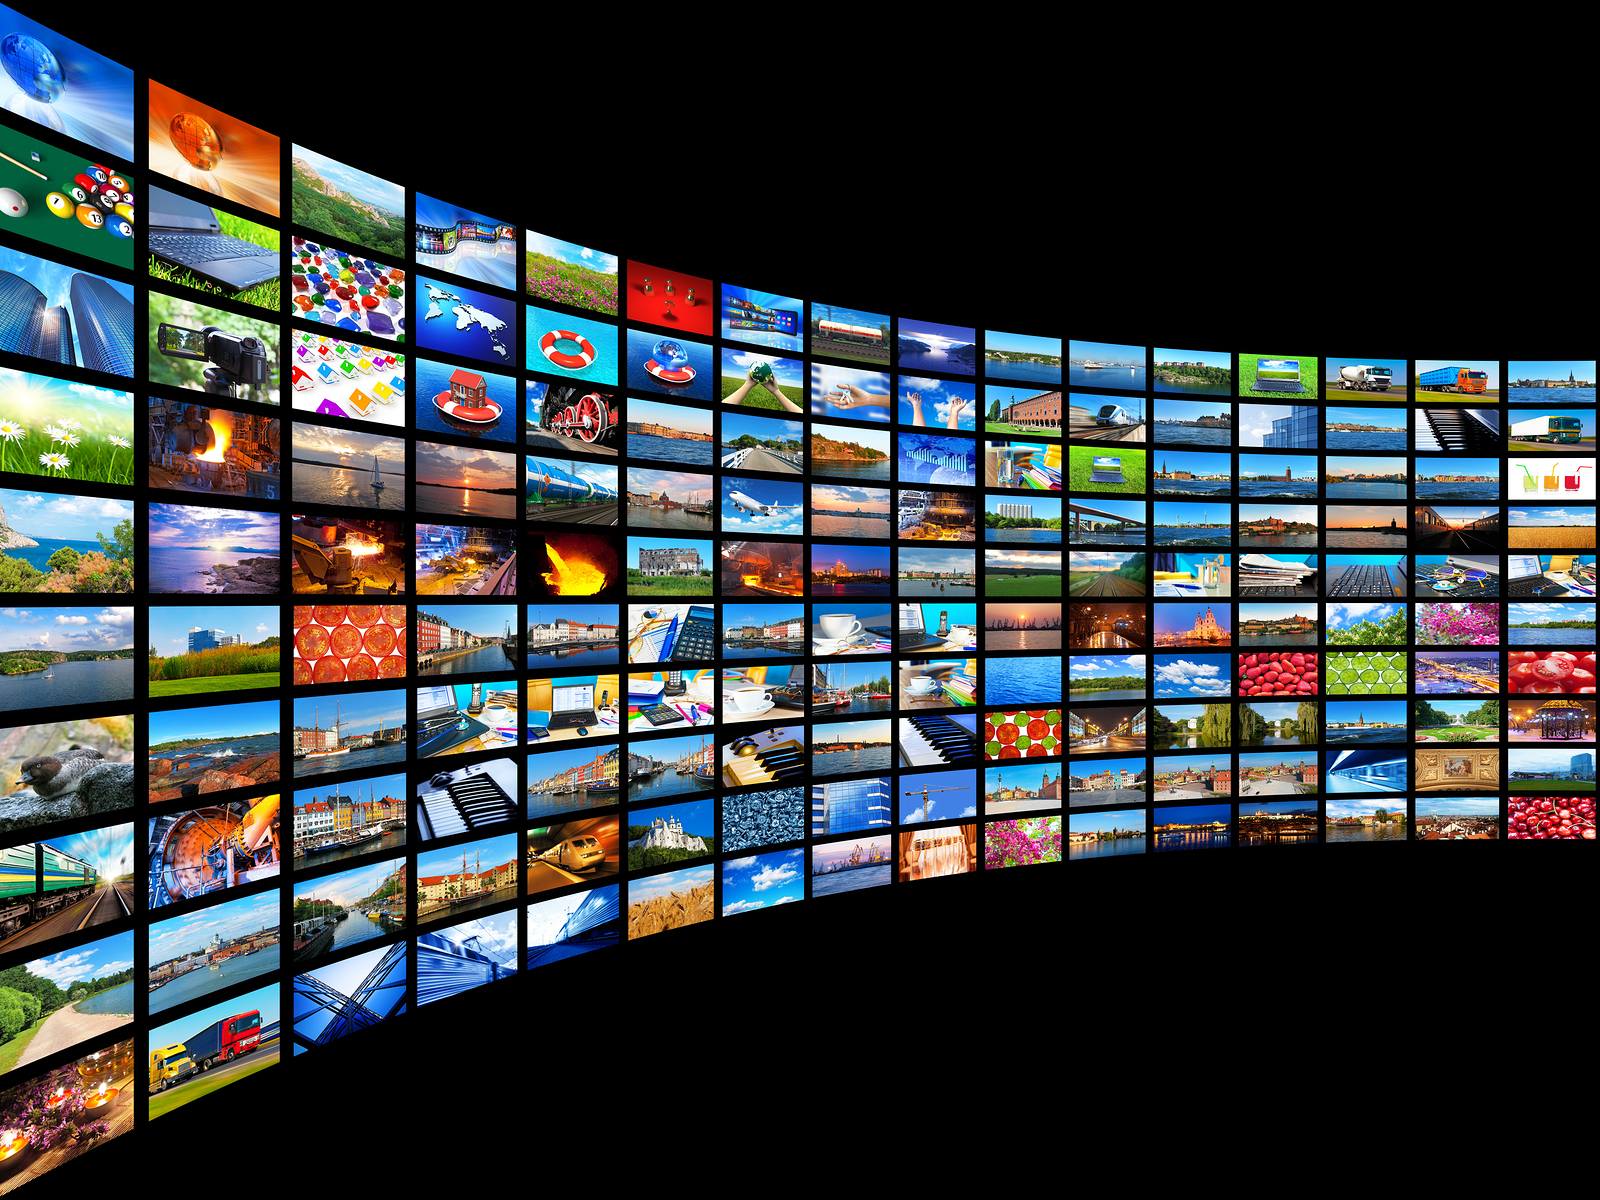 Ruling gives hope to internet TV streaming and rebroadcasting